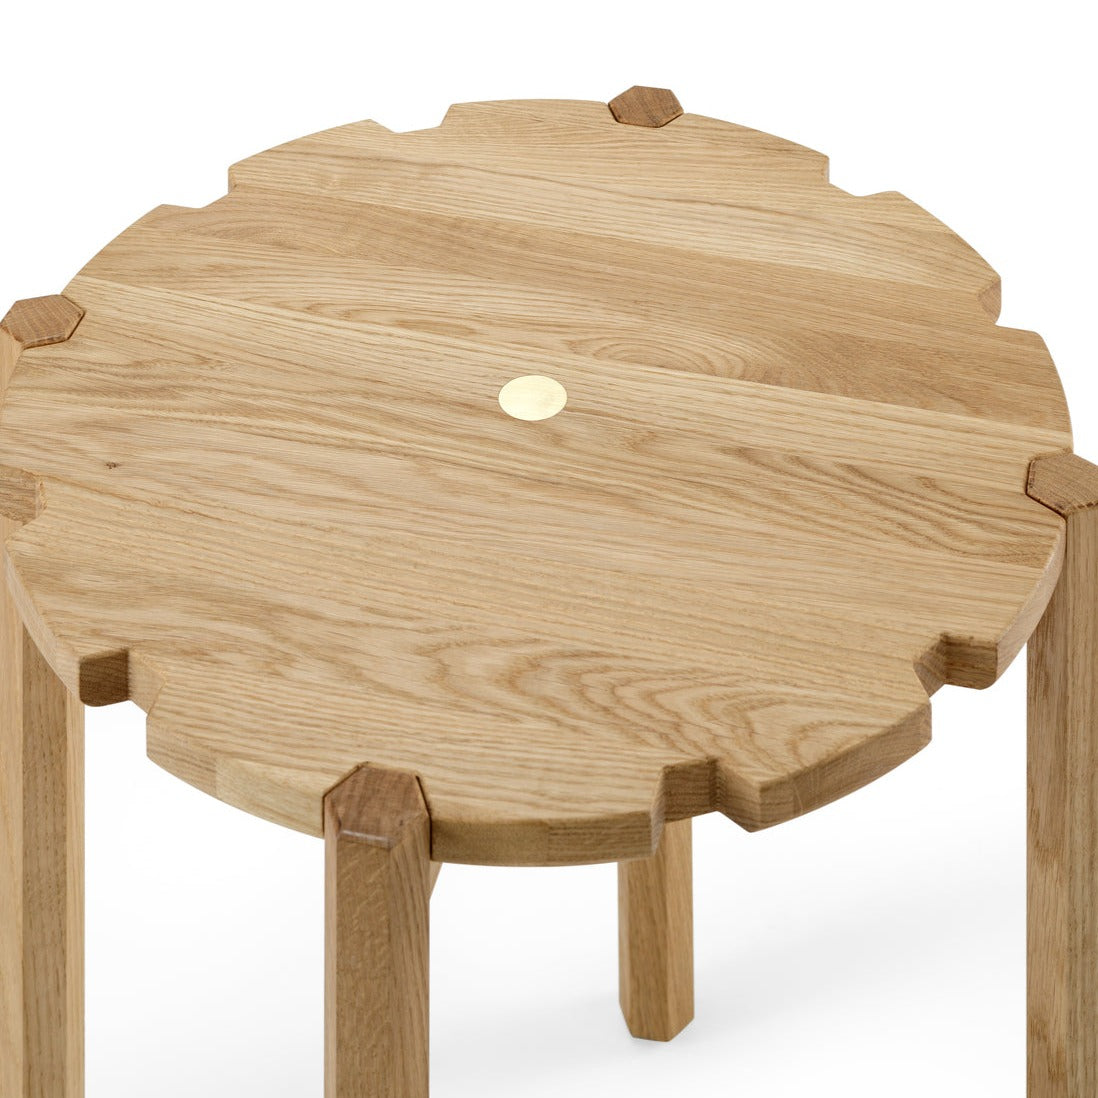 PINION Side Table small sizes-top view natural oak